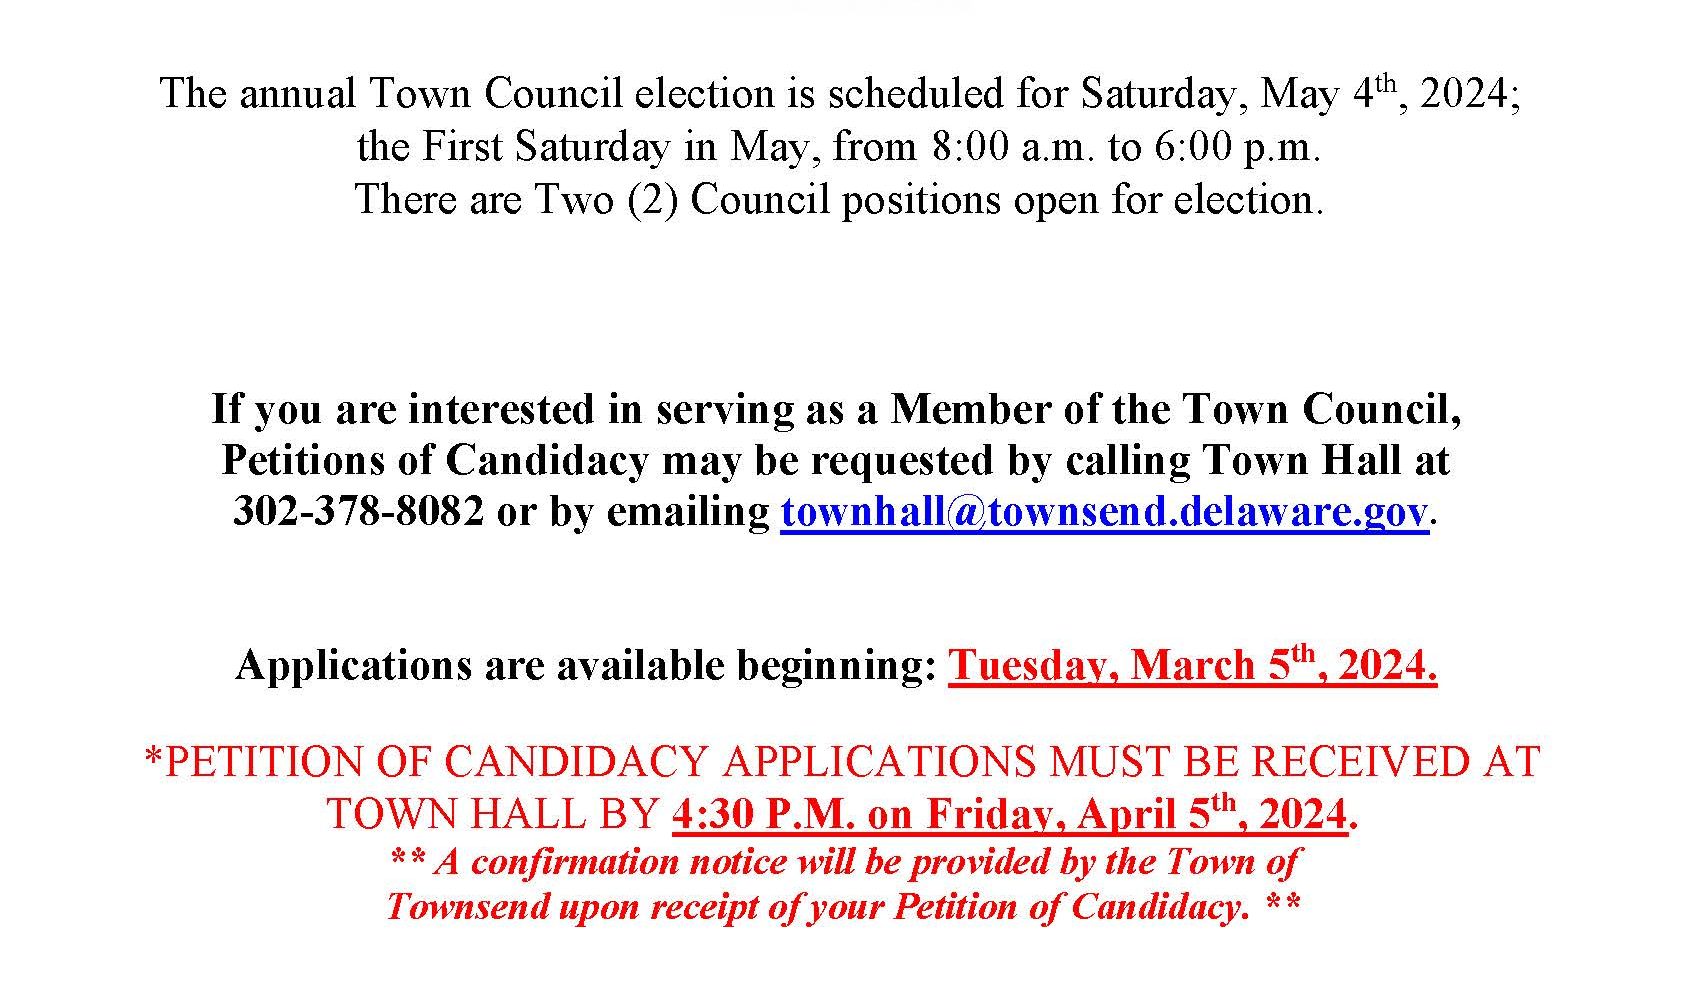 NOTICE OF SOLICITATION OF CANDIDATES. The annual Town Council election is scheduled for Saturday, May 4th, 2024; the First Saturday in May, from 8:00 a.m. to 6:00 p.m. There are Two (2) Council positions open for election. If you are interested in serving as a Member of the Town Council, Petitions of Candidacy may be requested by calling Town Hall at 302-378-8082 or by emailing townhall@townsend.delaware.gov. Applications are now available beginning: Tuesday, March 5th, 2024. *PETITION OF CANDIDACY APPLICATIONS MUST BE RECEIVED AT TOWN HALL BY 4:30 P.M. on Friday, April 5th, 2024. ** A confirmation notice will be provided by the Town of Townsend upon receipt of your Petition of Candidacy. ** QUALIFICATIONS for CANDIDACY Be 18 years of age. Be a Citizen of the United States of America. Be a registered voter in the State of Delaware, New Castle County. Be a legal resident within the Town Corporate boundaries for a minimum of twelve (12) consecutive months immediately preceding the filing of Candidacy. Must successfully pass a background check, as provided by the Town of Townsend, if elected.